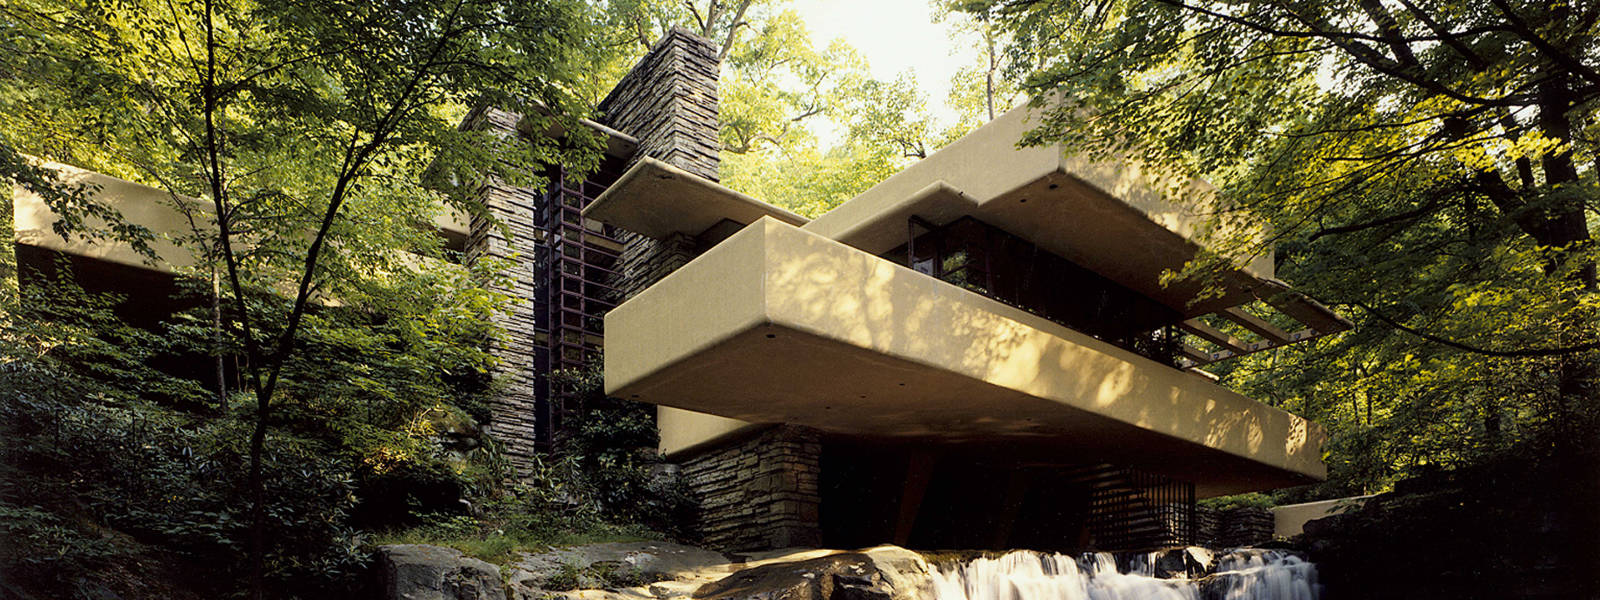 Accessibility at Fallingwater